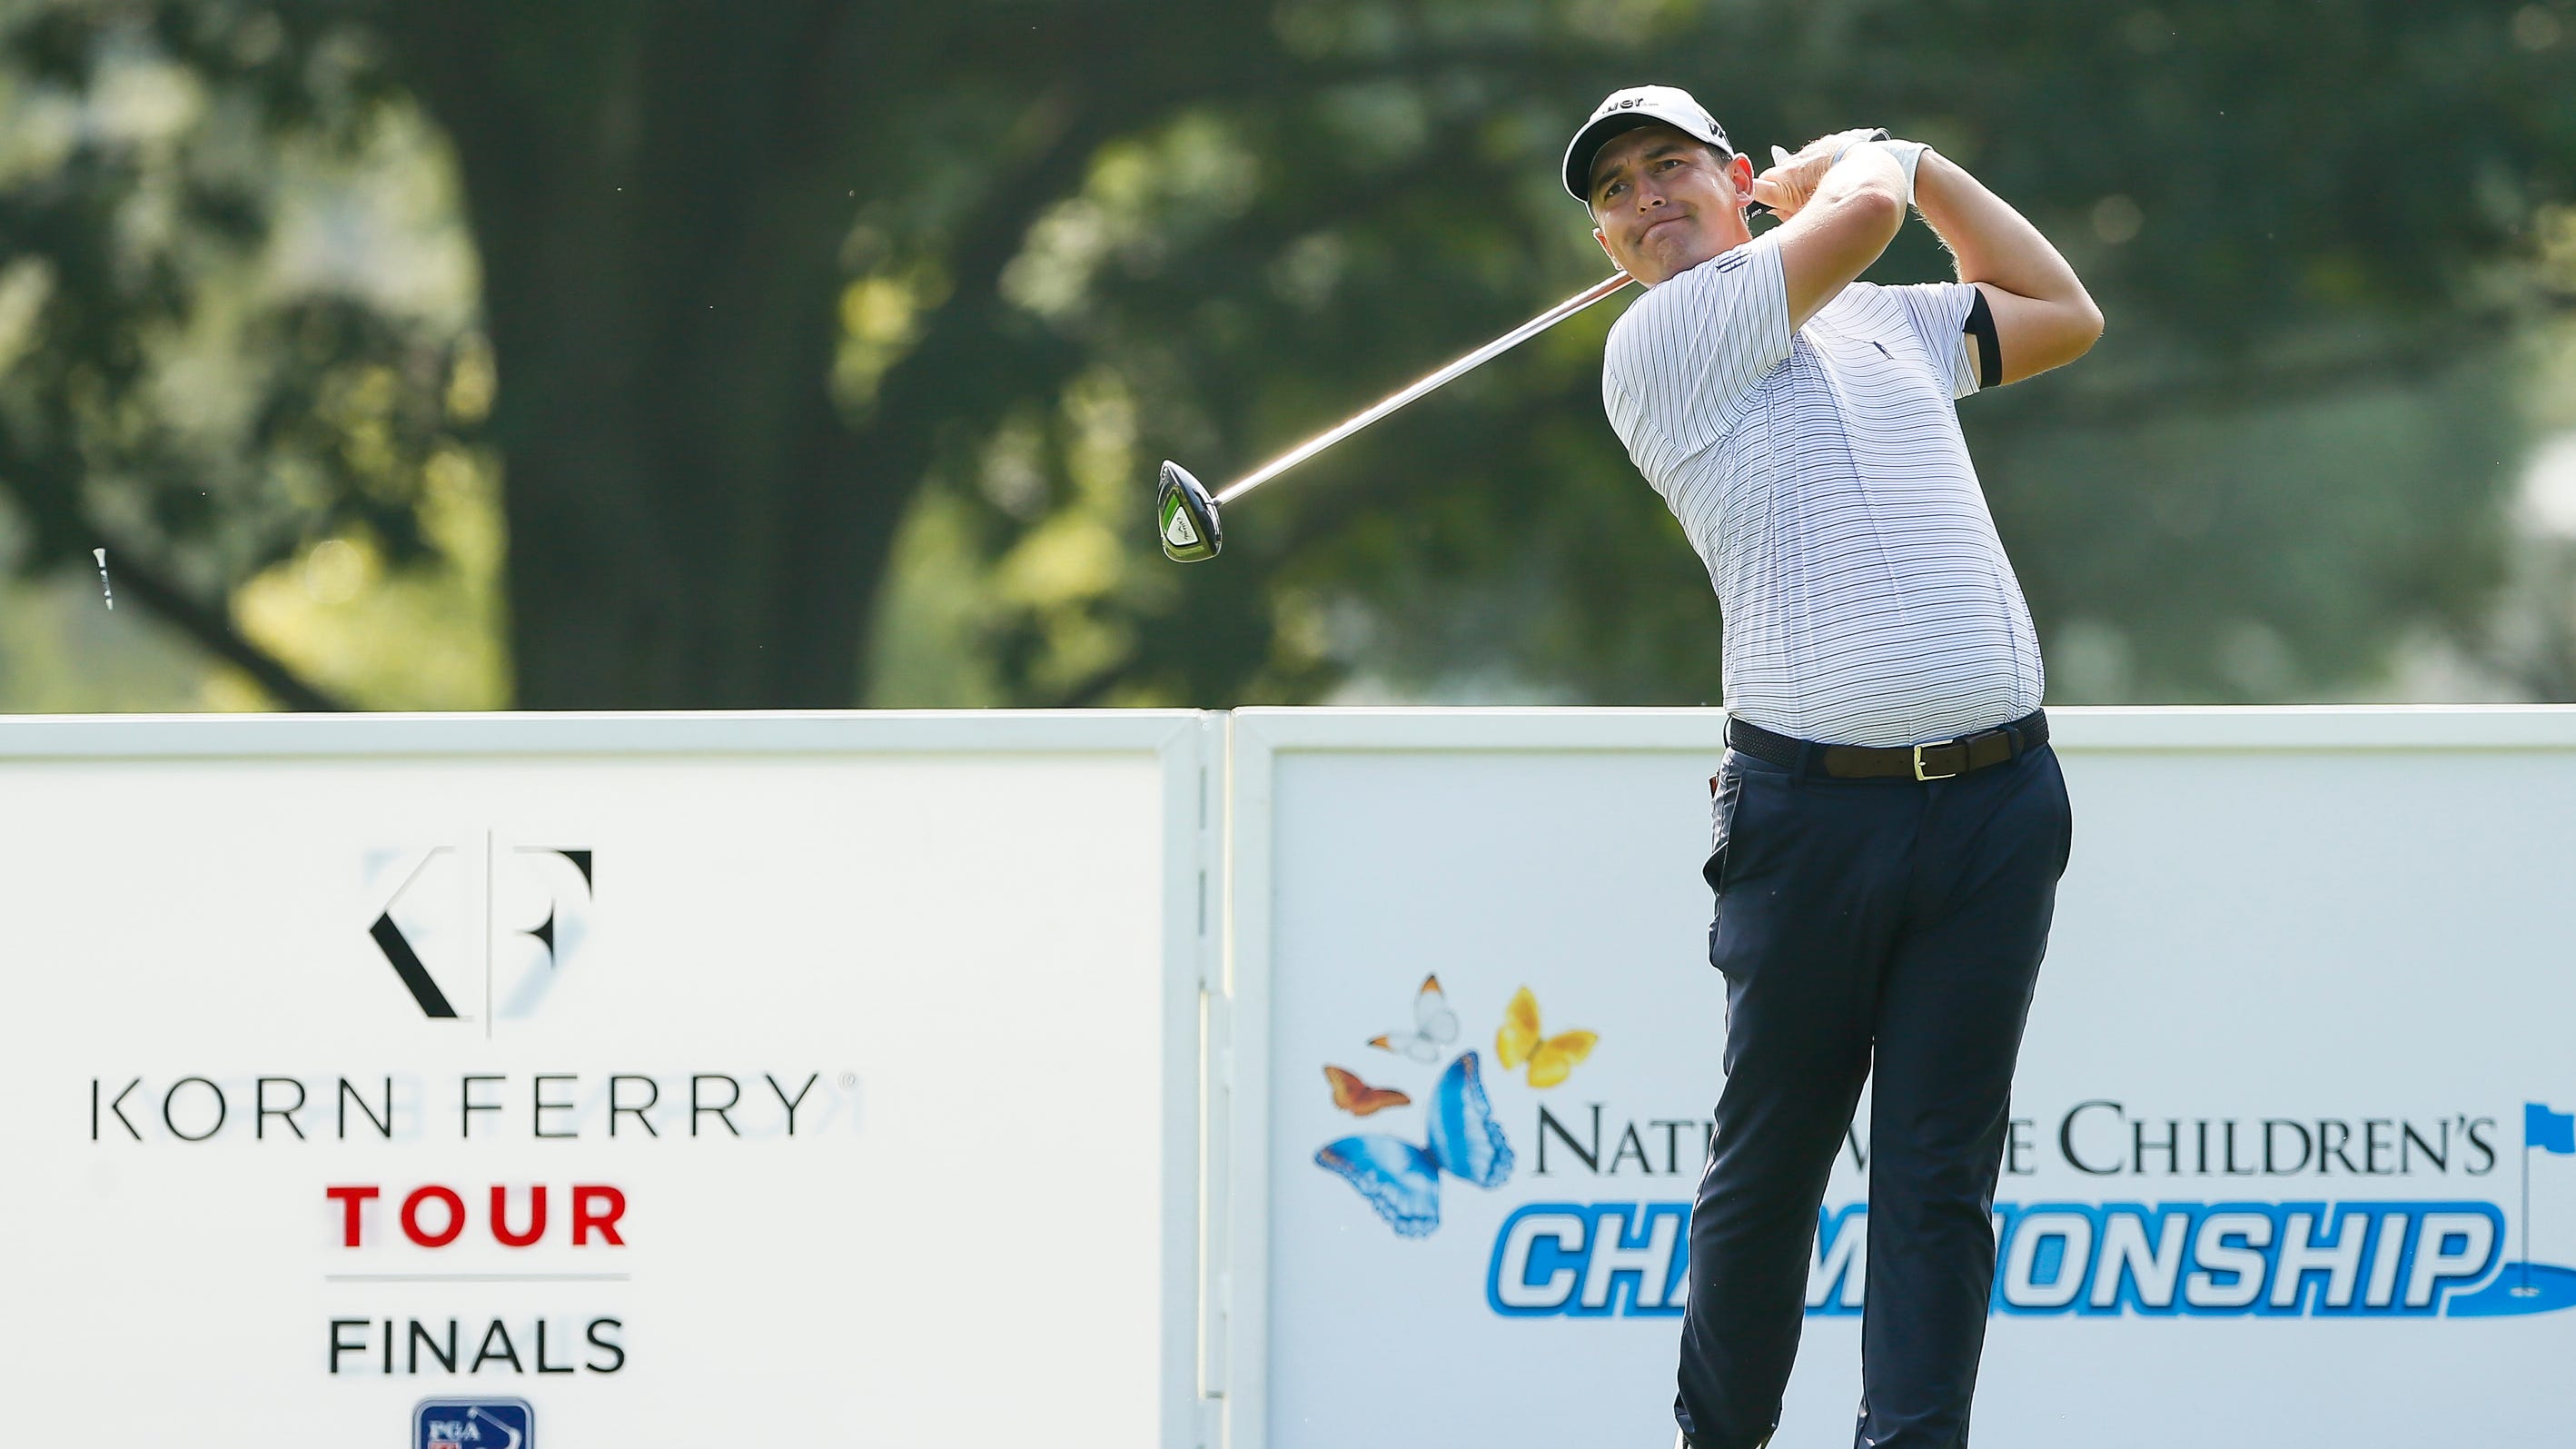  Nicklaus Award winner Justin Lower grinding to fulfill dream of playing on PGA Tour 